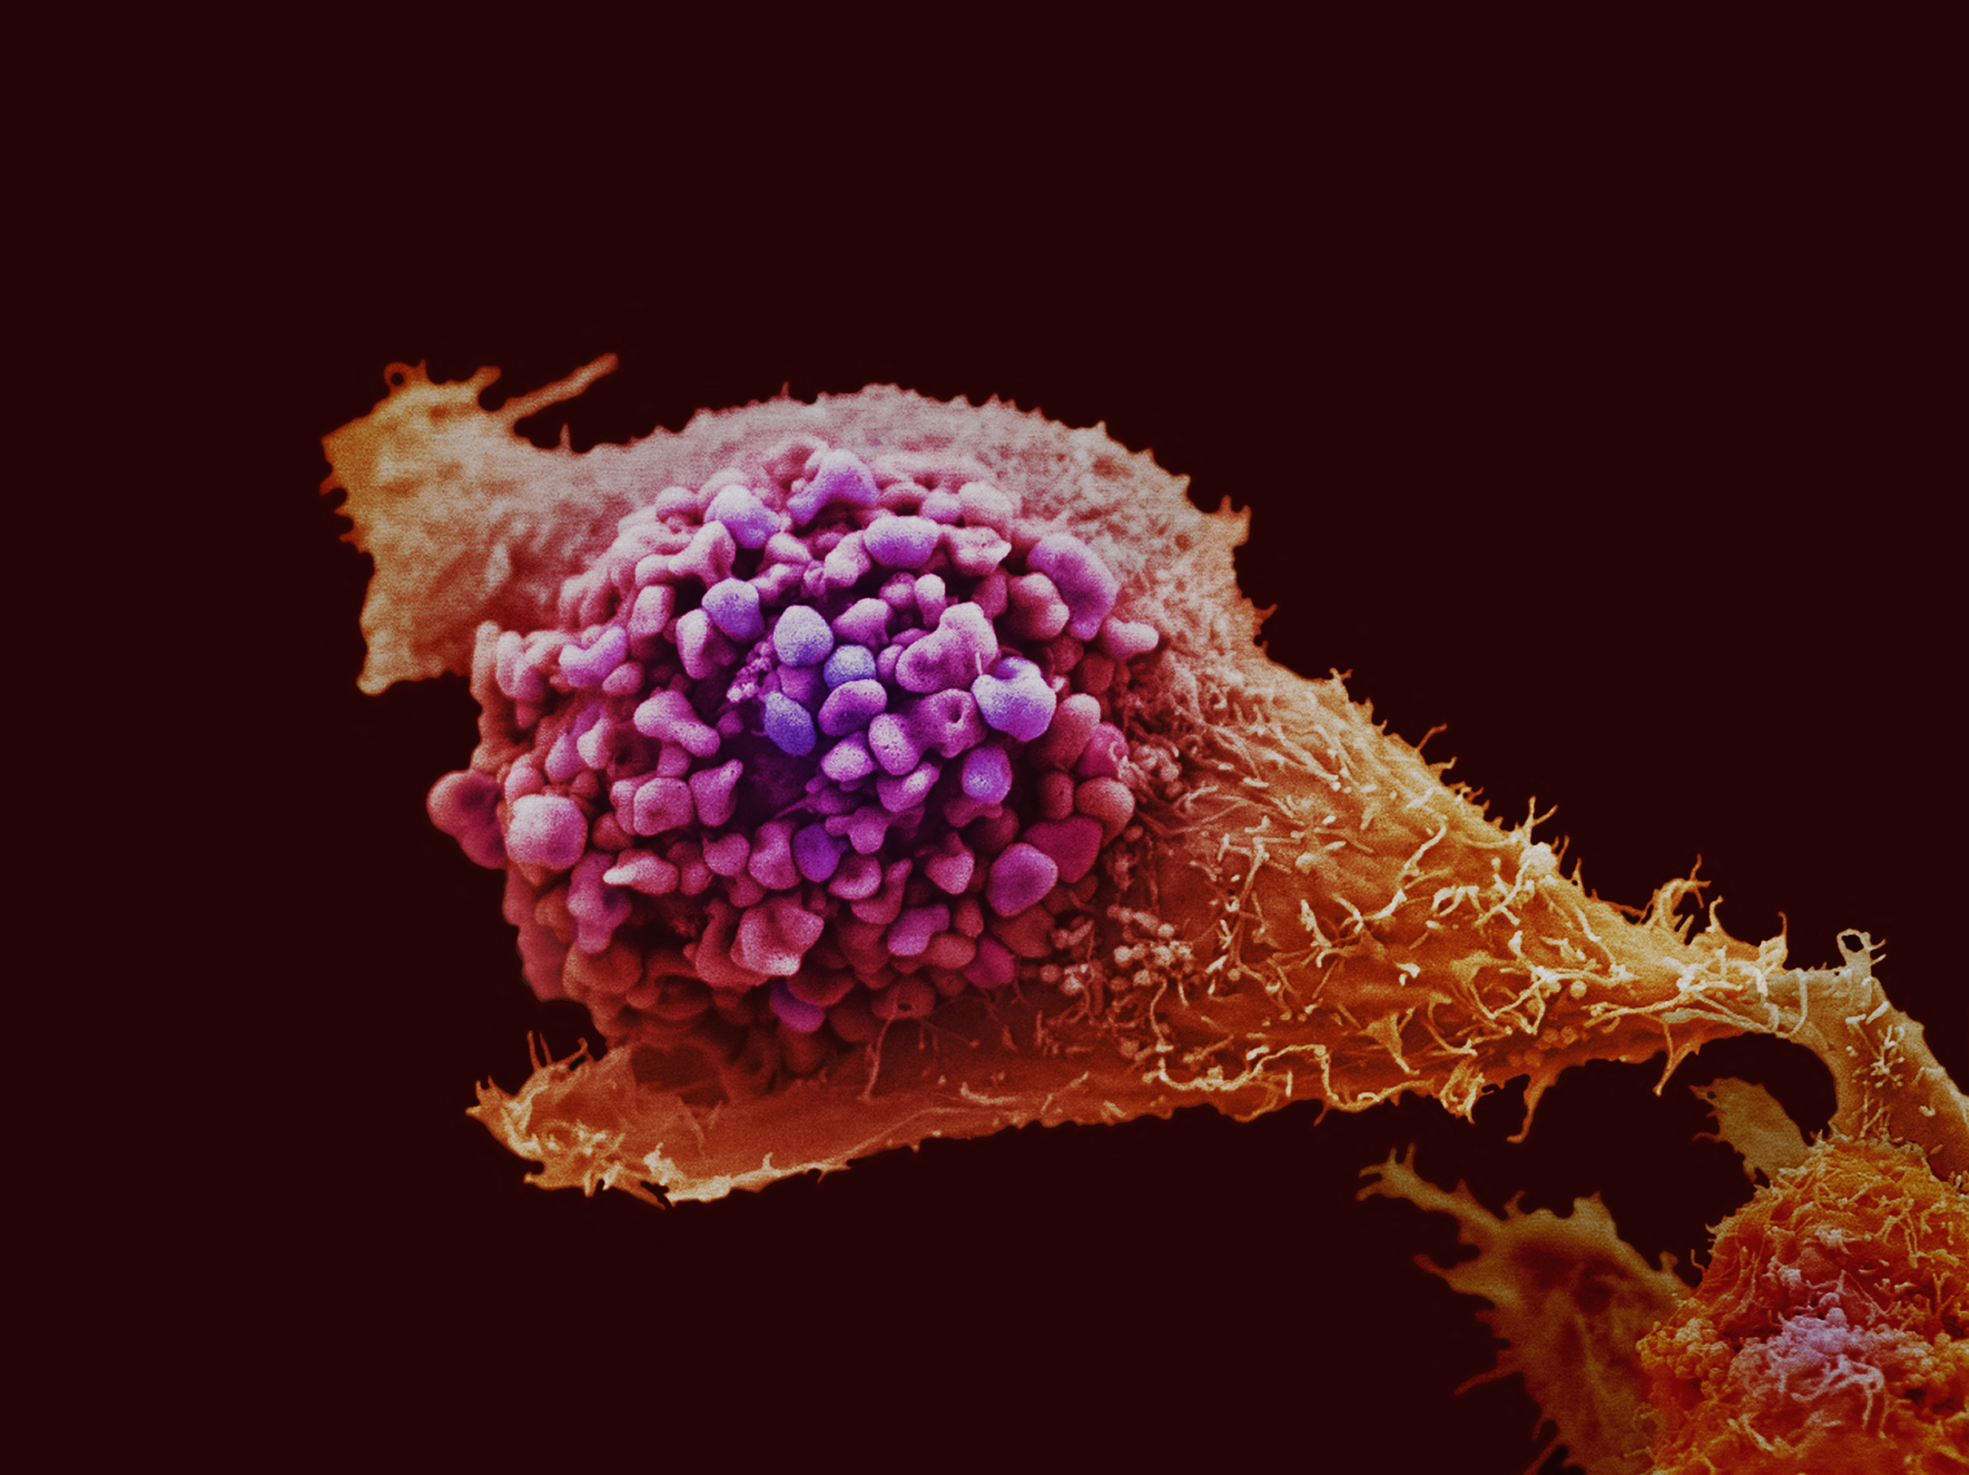 A Prostate Cancer Cell